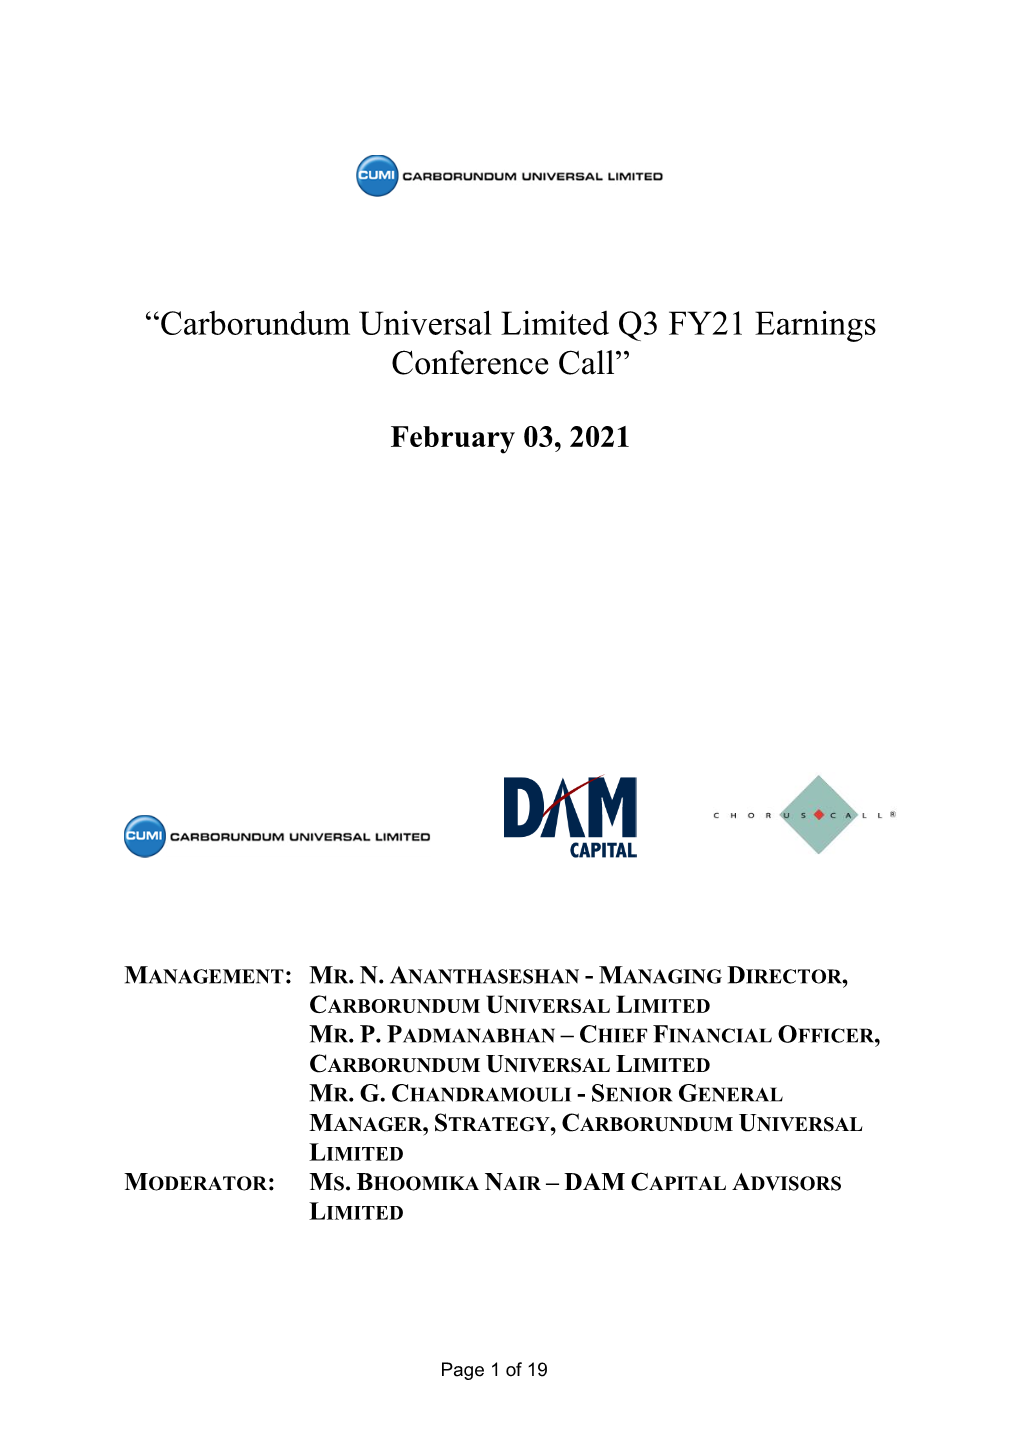 “Carborundum Universal Limited Q3 FY21 Earnings Conference Call”